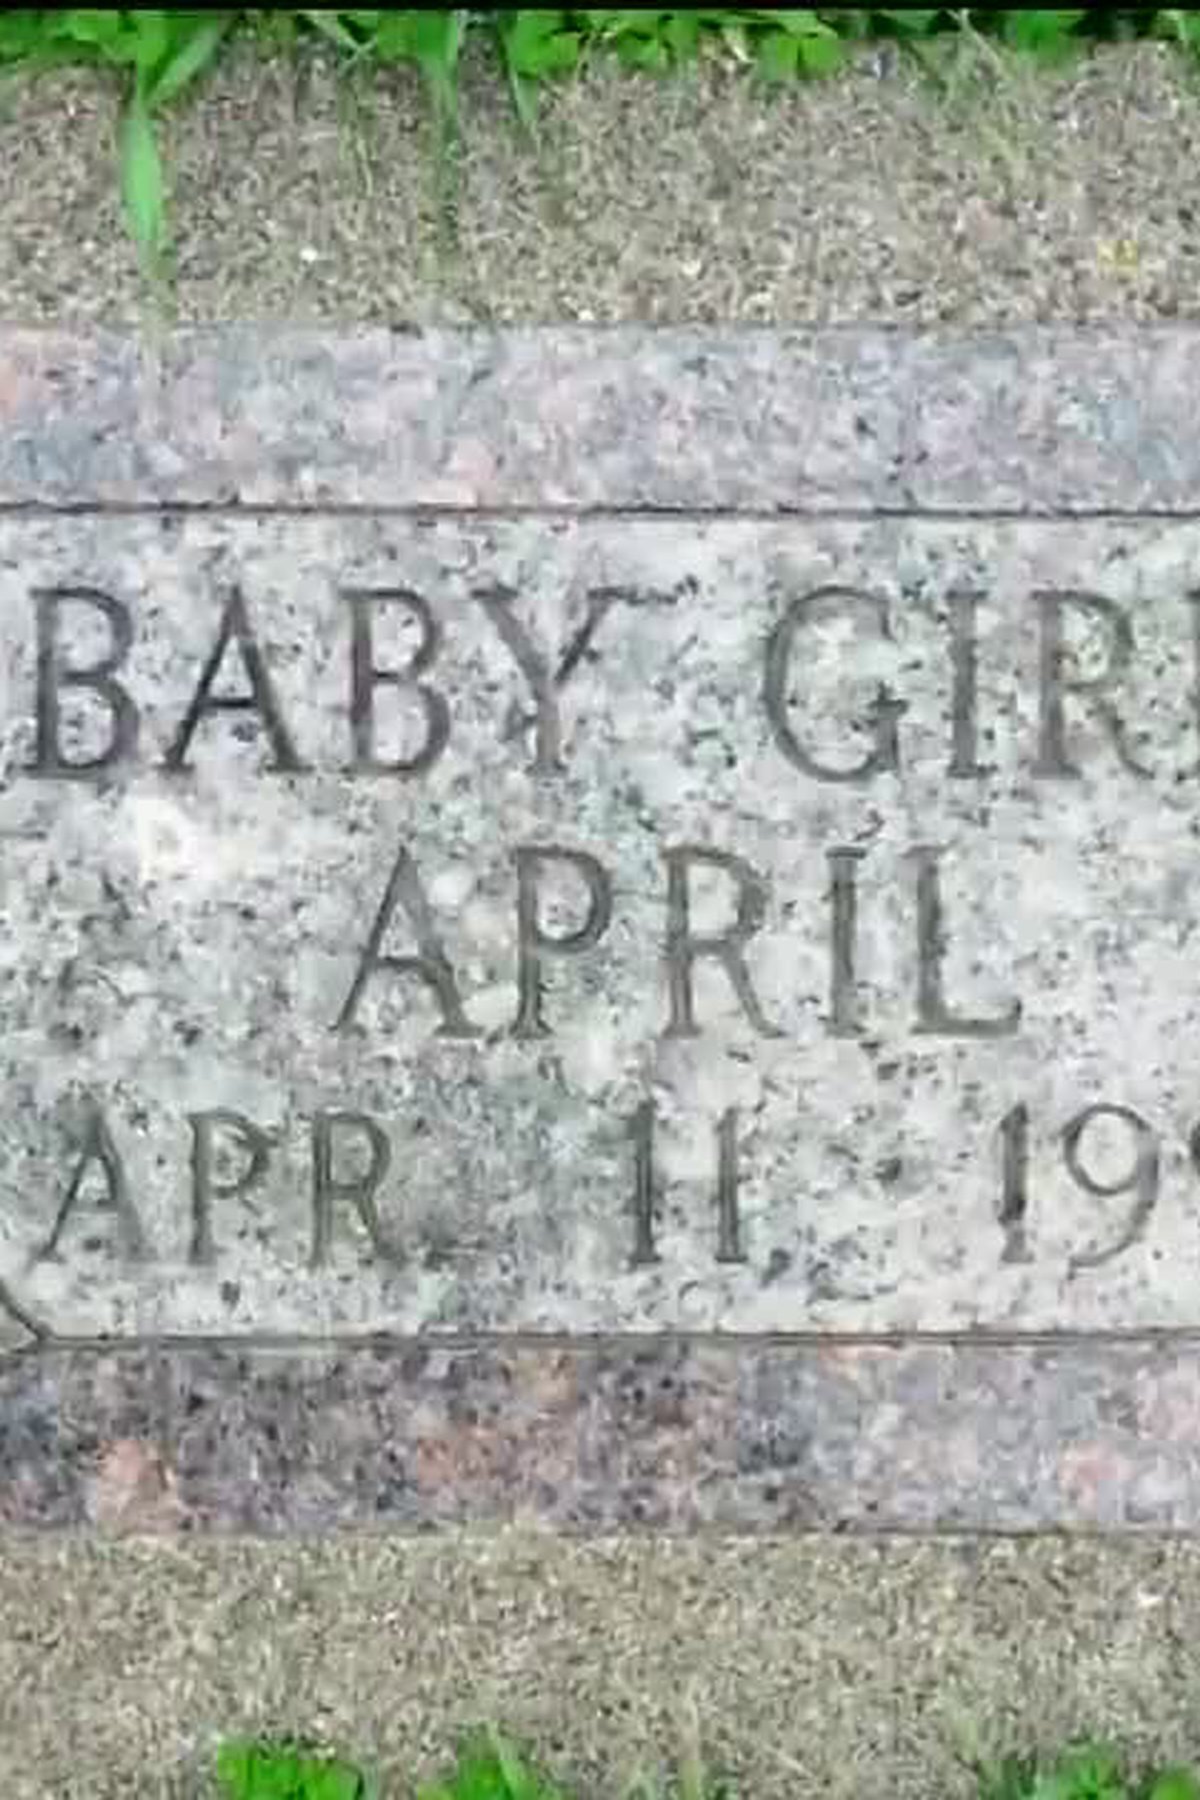 [IMAGE] Baby April’s 28-year-old cold case solved with the help of genetic genealogy testing